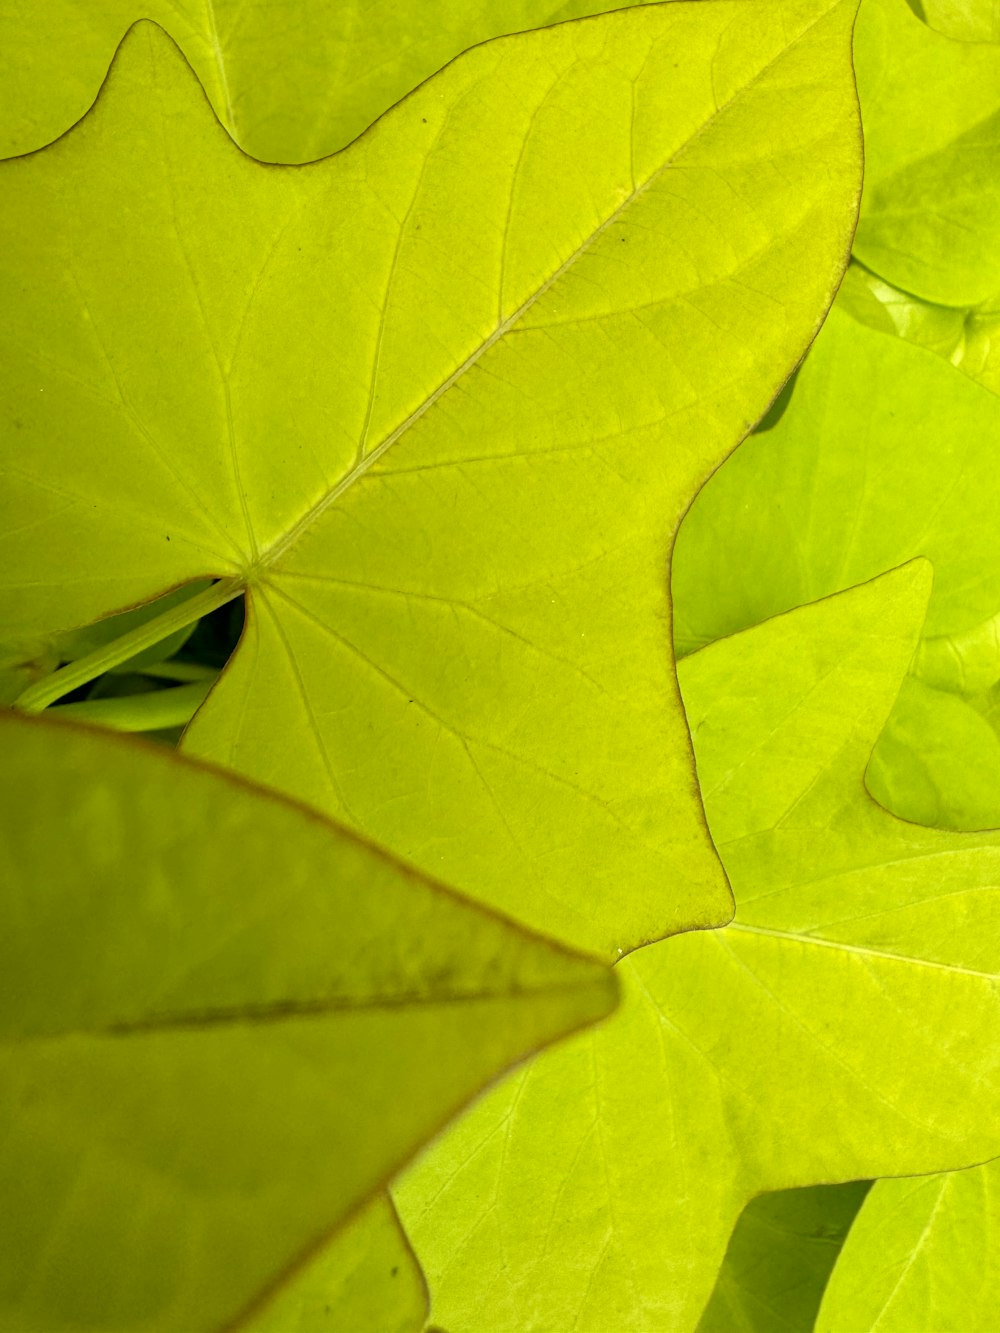 a close up of a green plant with leaves